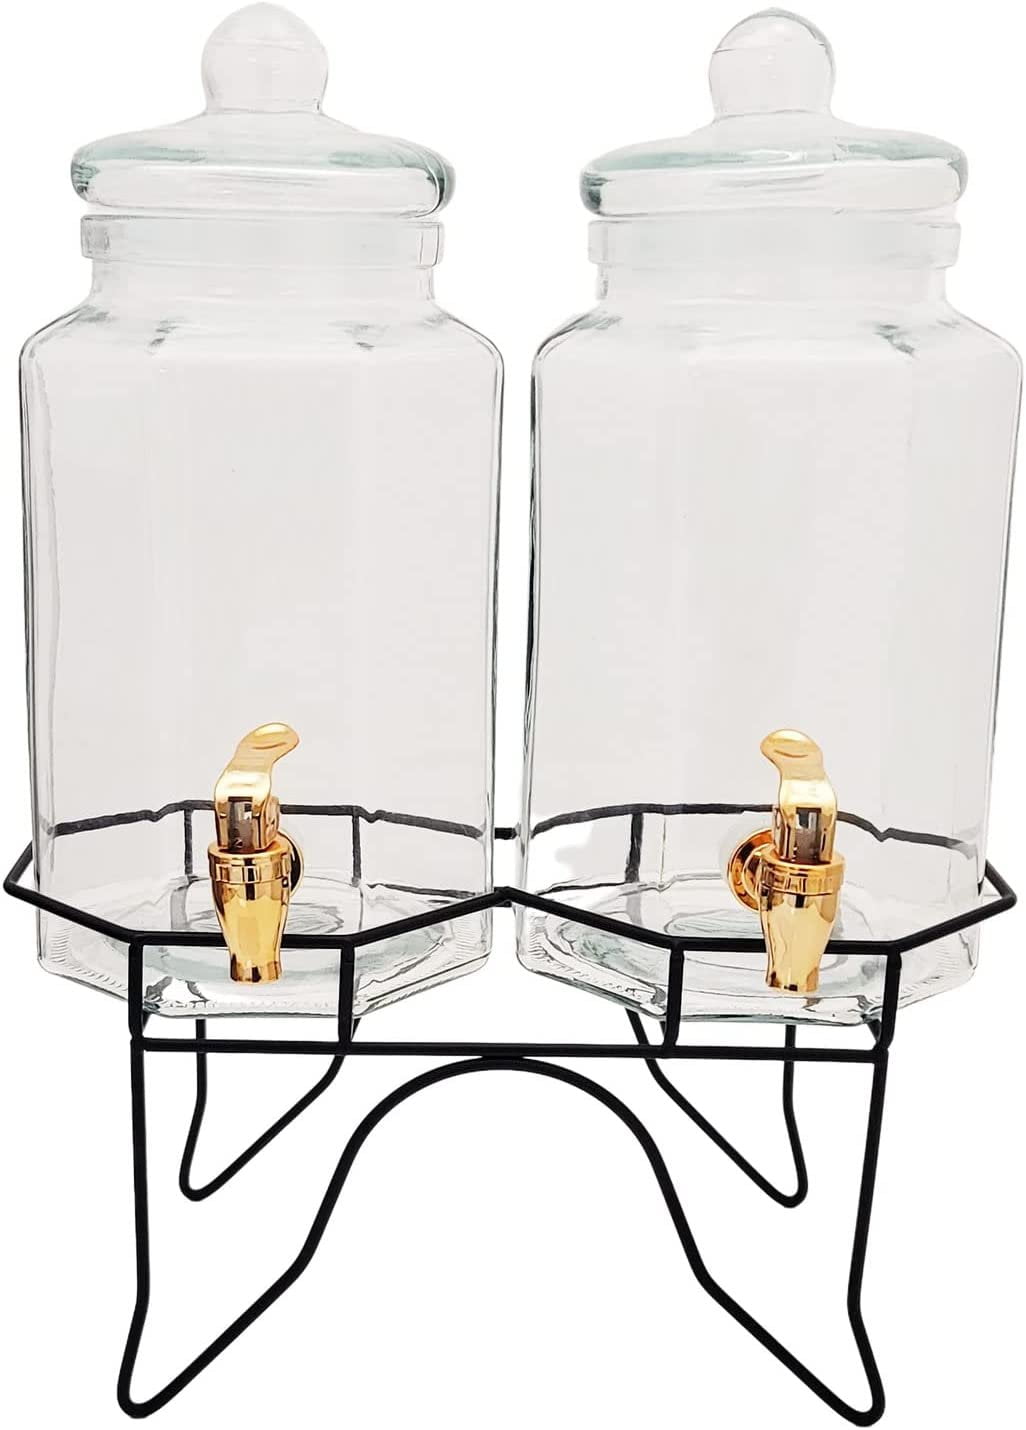 Set of 2 Glass Gravity Beverage Drink Dispensers with Stand & Copper Spigots